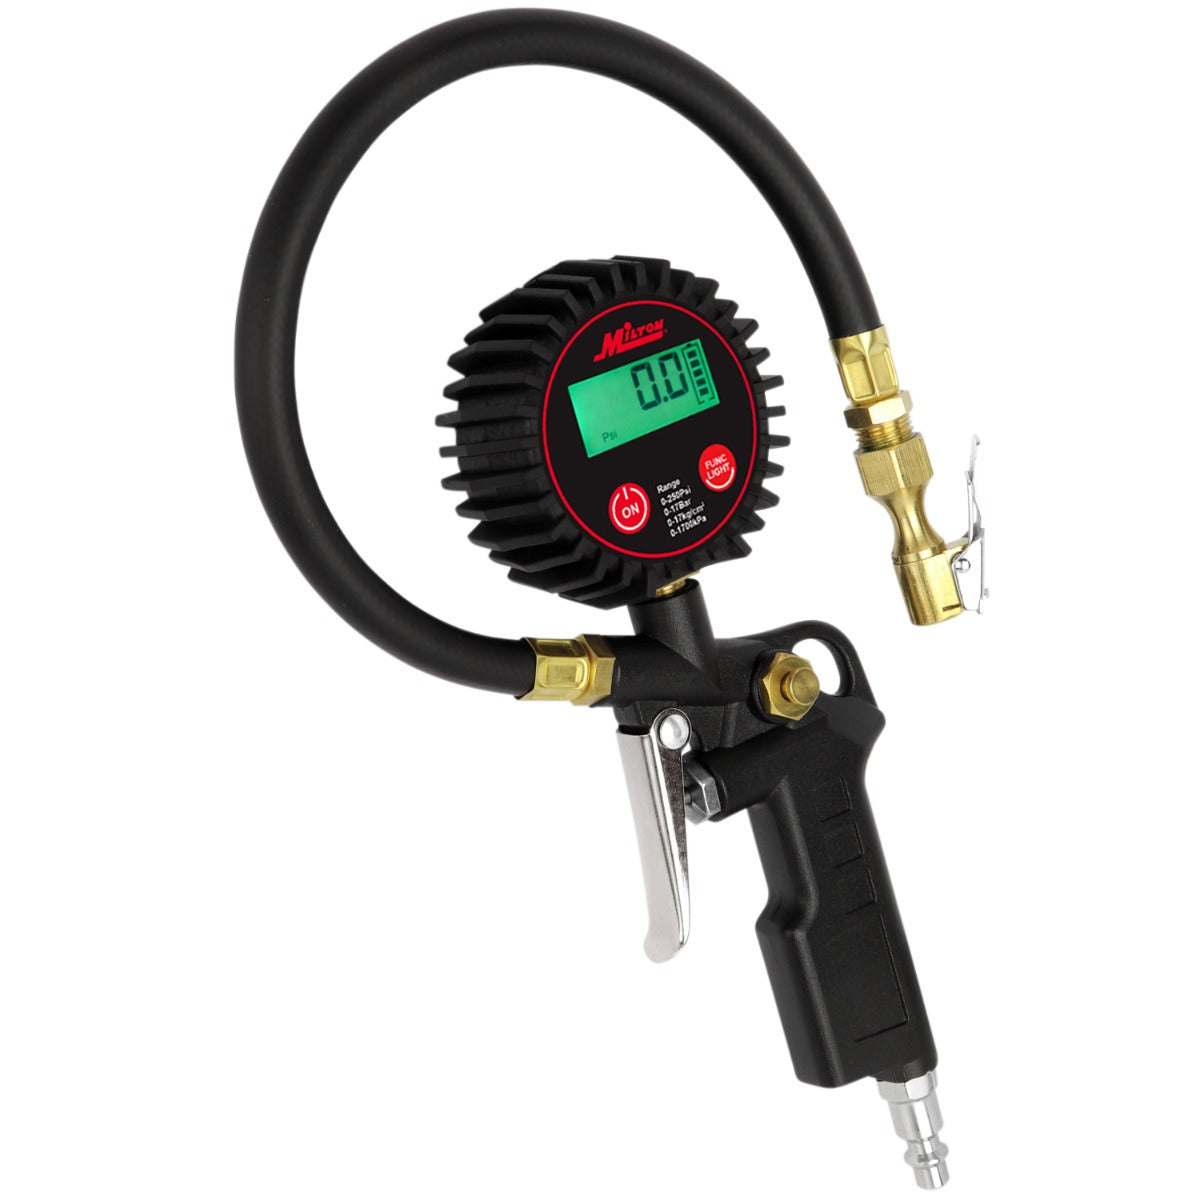 Milton® Digital Tire Inflator with Pressure Gauge, 0-250 PSI, Accurate Tire  Pressure Gauge, with 14 Rubber Air Hose, Brass Lock-On Clip Air Chuck and  Compressor Accessories — Milton® Industries Inc.